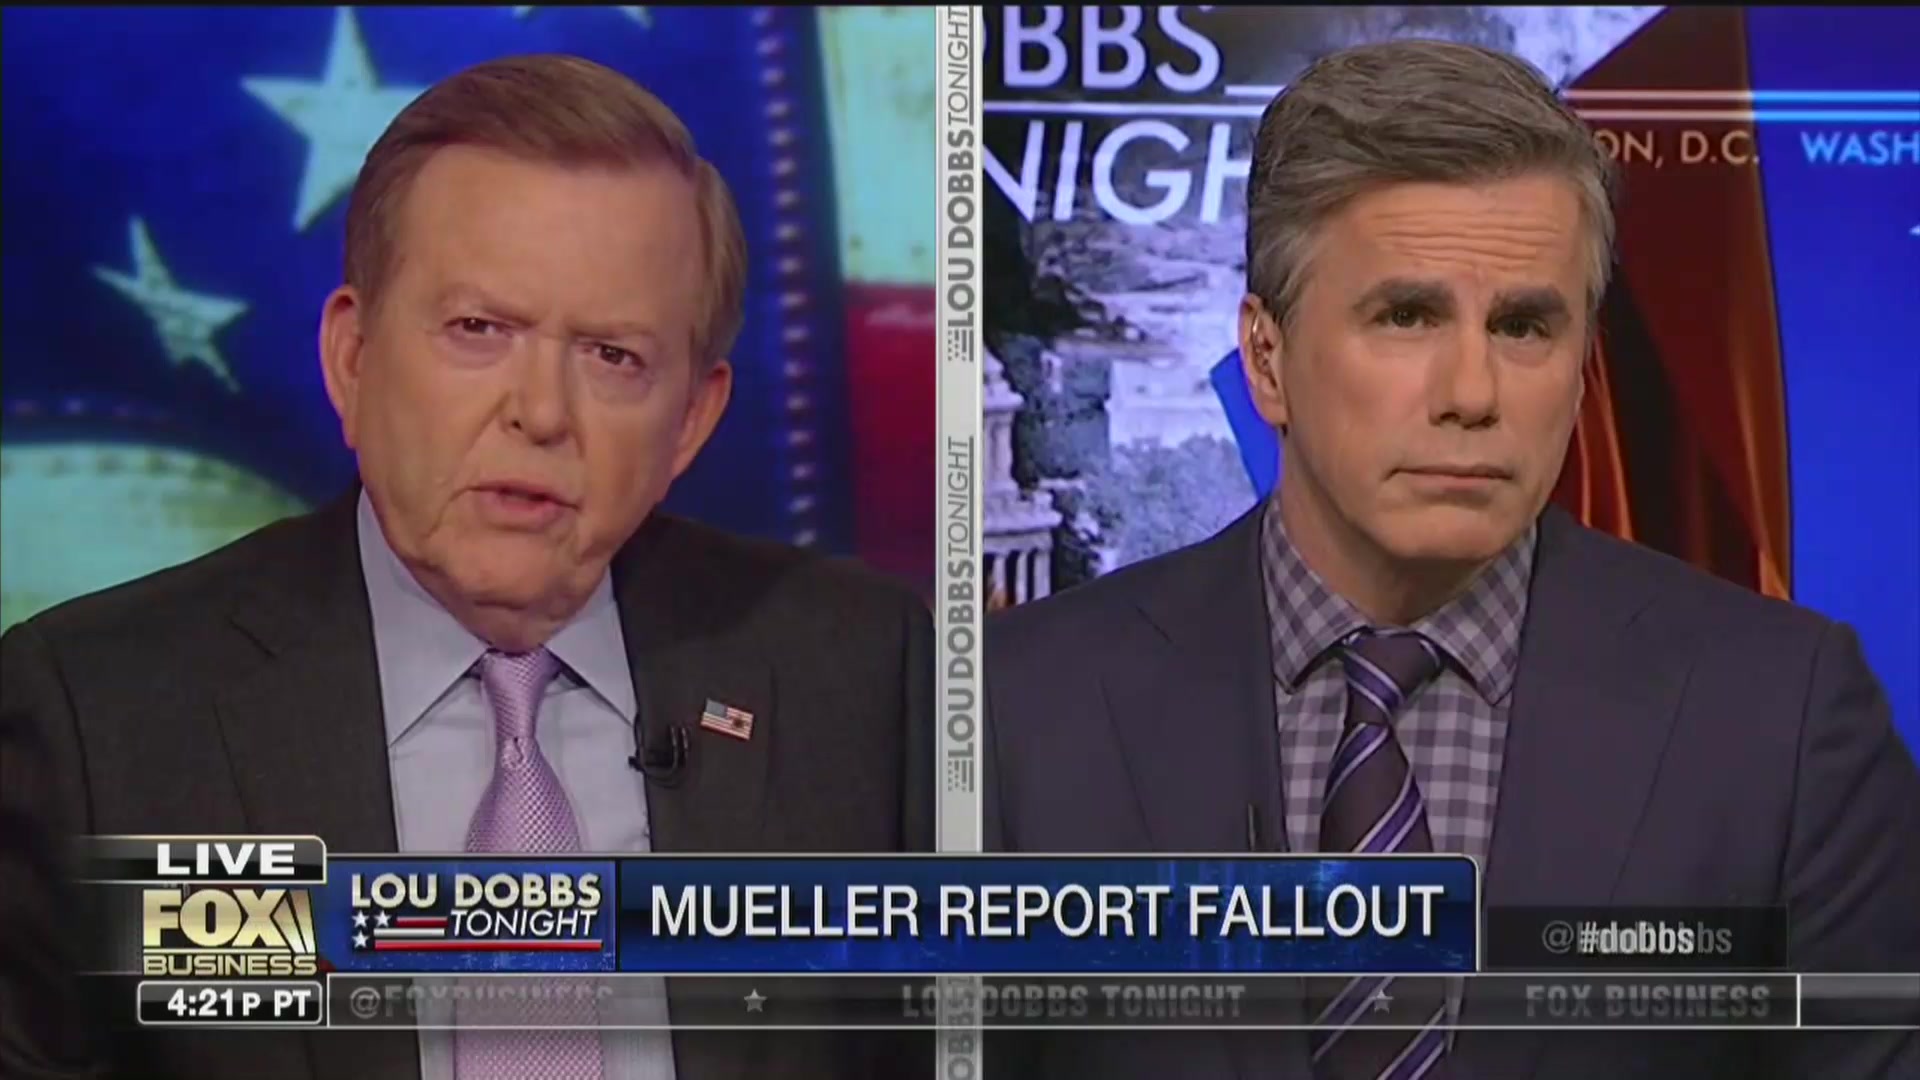 Fox’s Lou Dobbs: Should Robert Mueller and James Comey Be Investigated for Collusion?